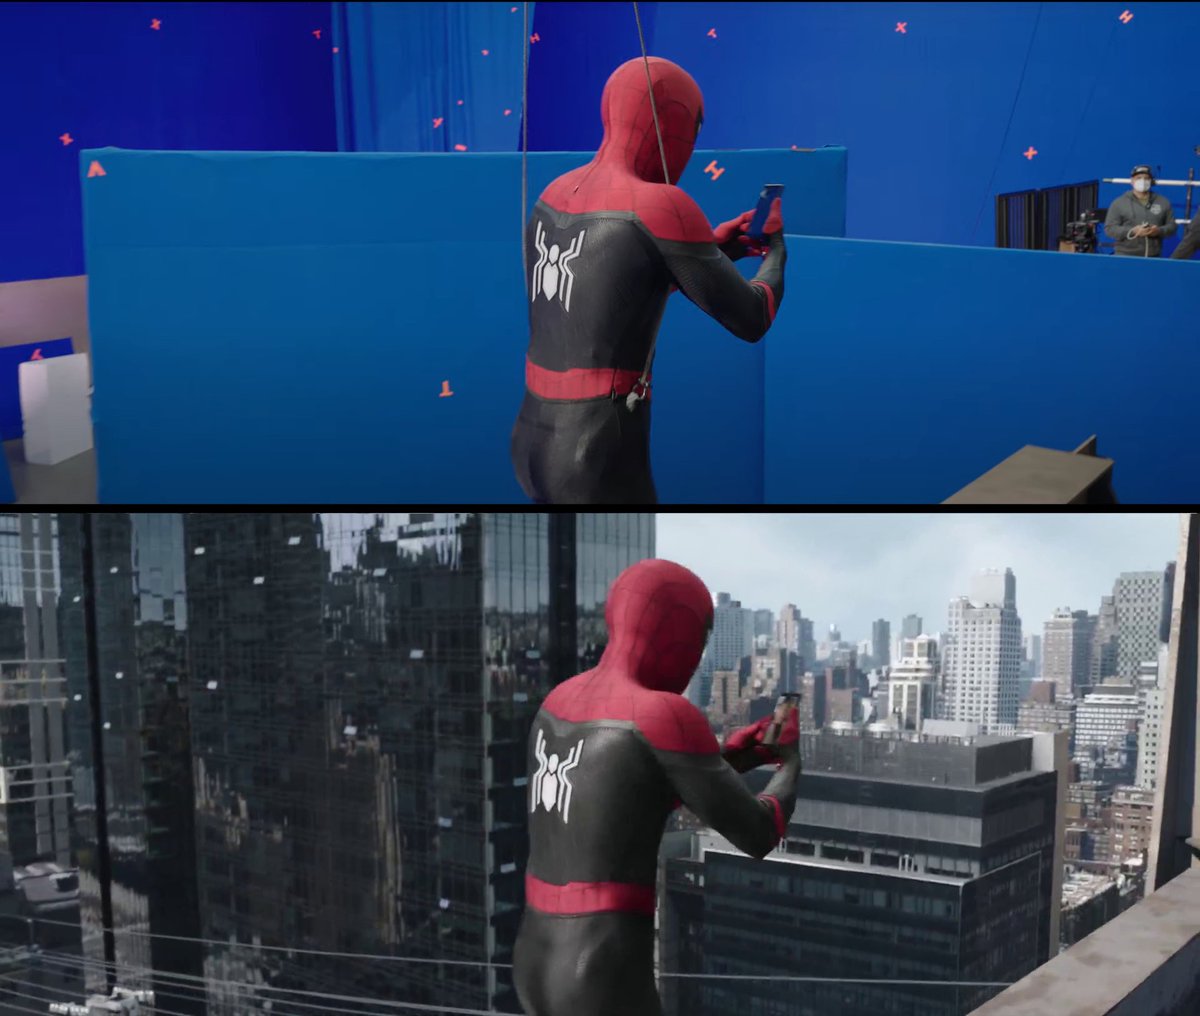 RT @_Earth_199999: before and after shots of Spider-Man No Way Home (2021) https://t.co/uOwUnnOdzO